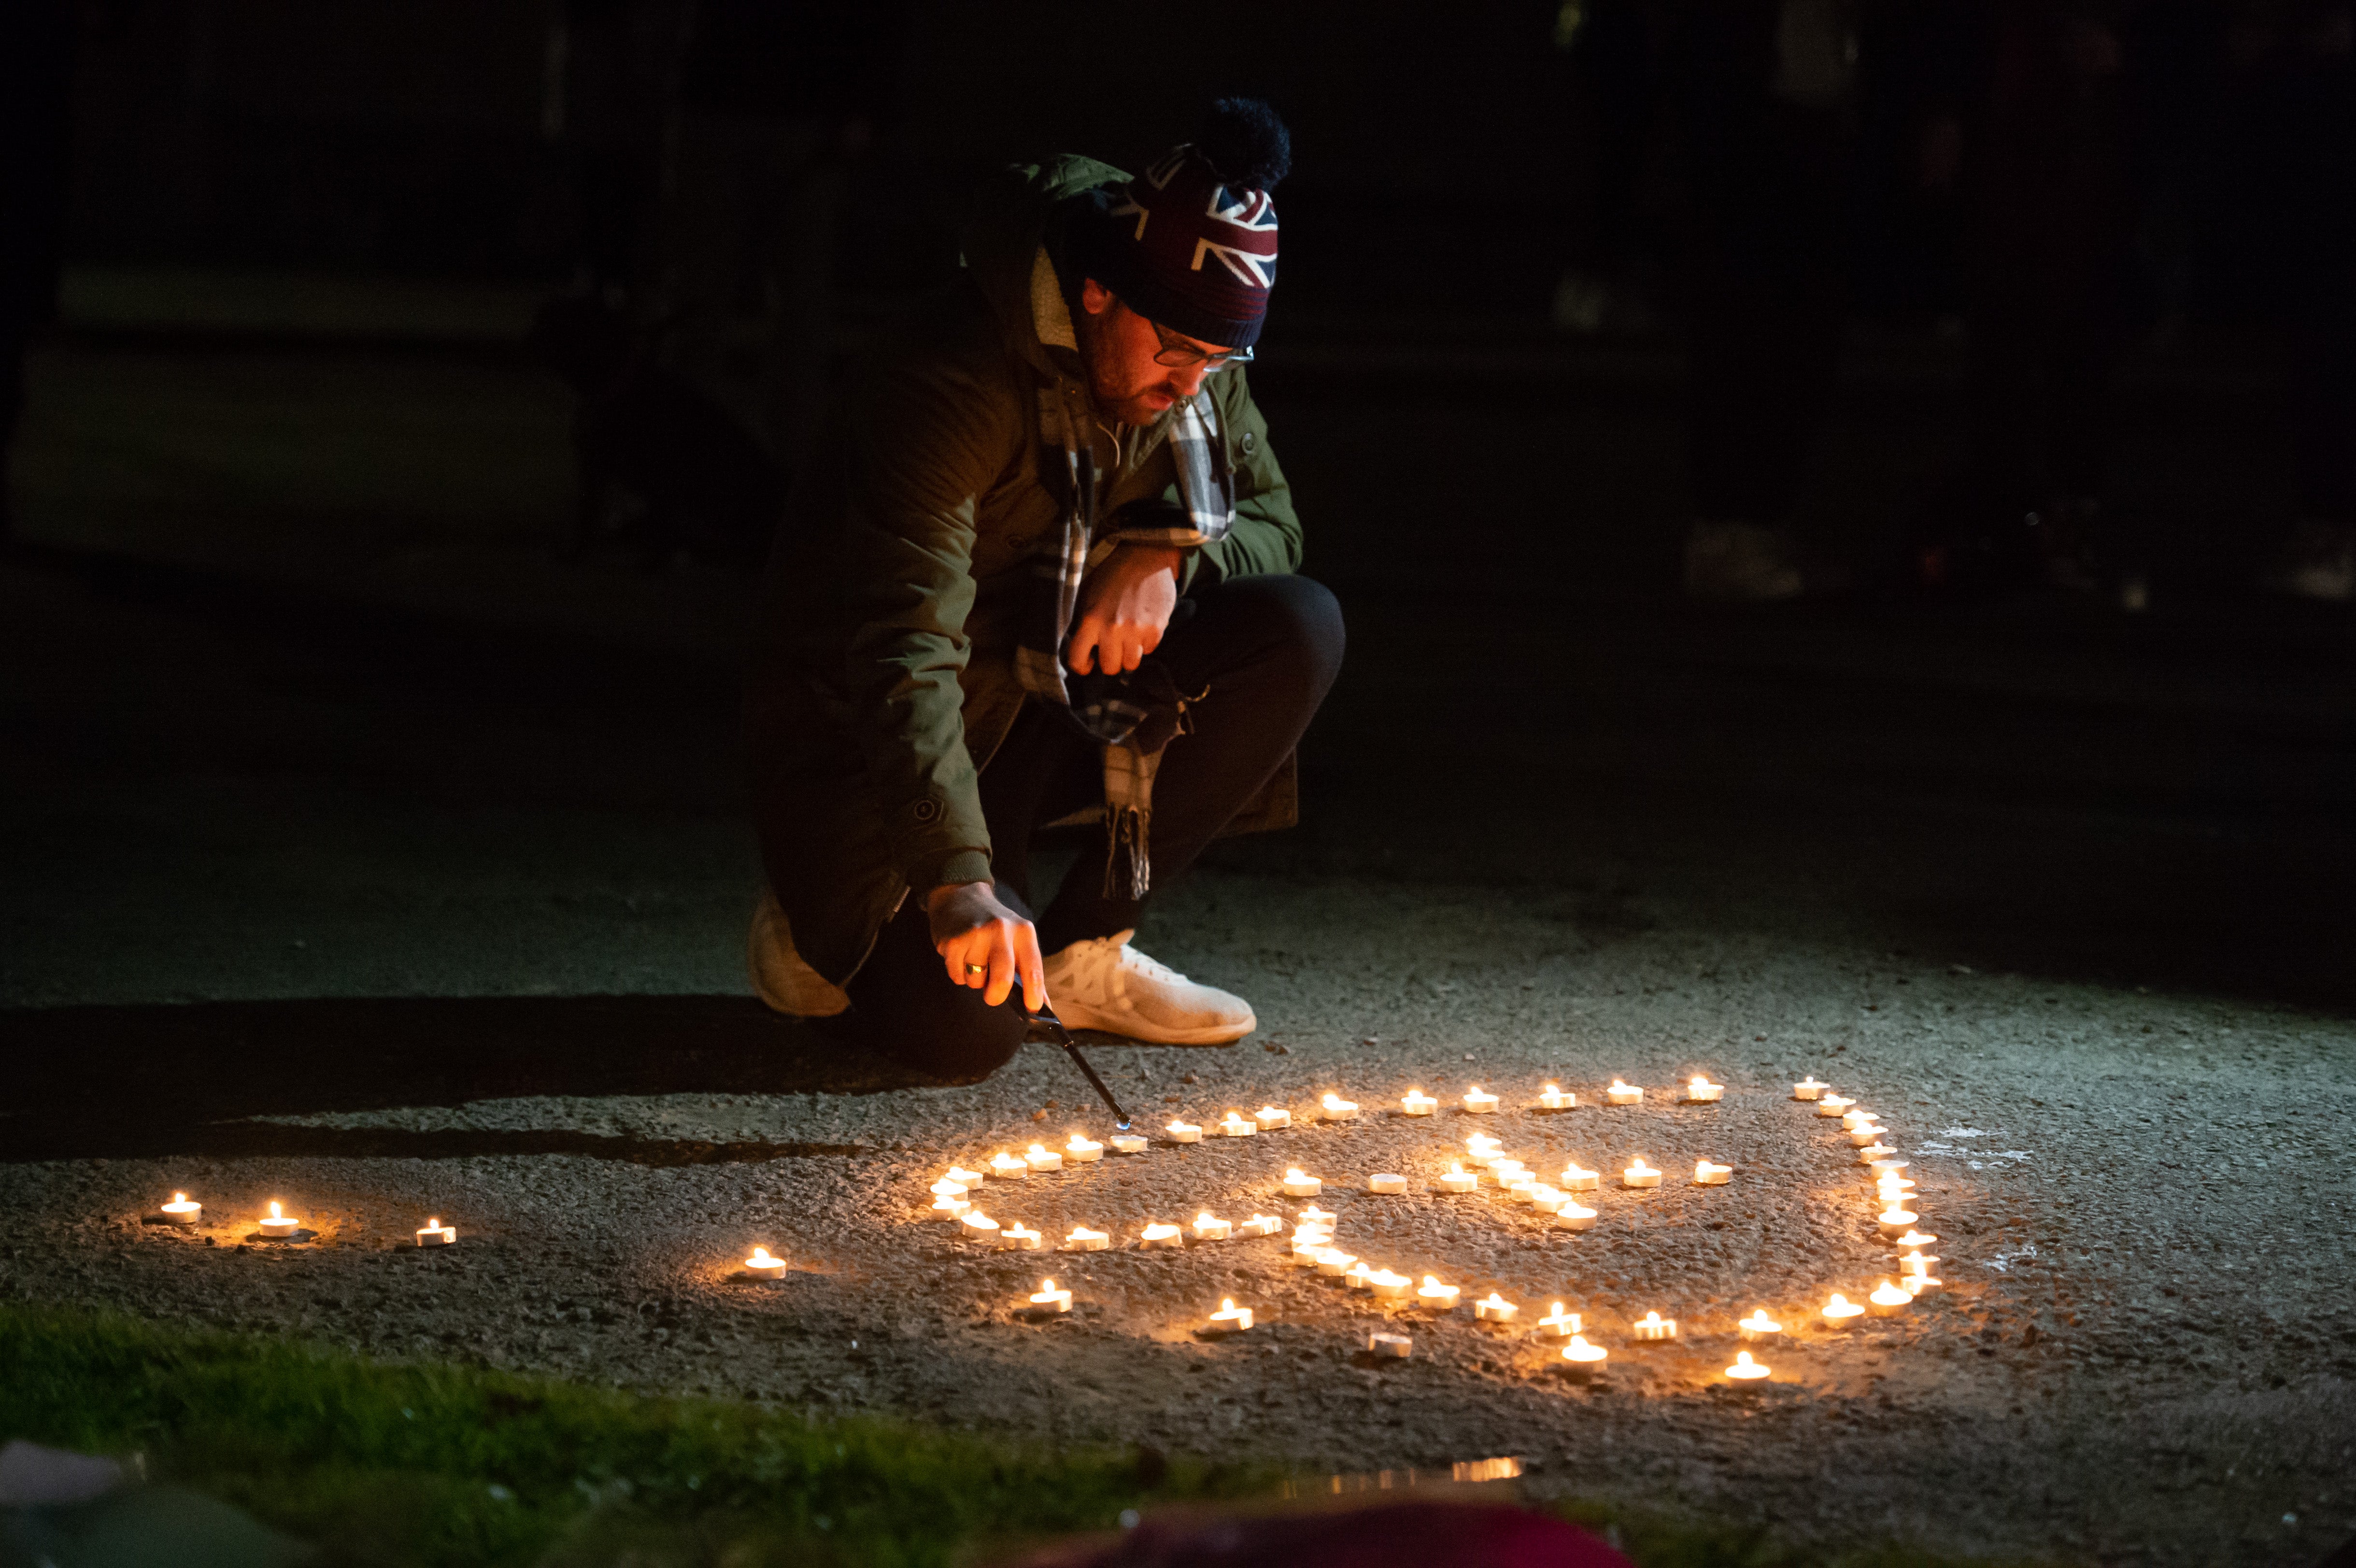 Family, friends and members of the public gathered by Sheepstor Road bus stop in Plymouth for a candlelit vigil in tribute of Bobbi-Anne McLeod